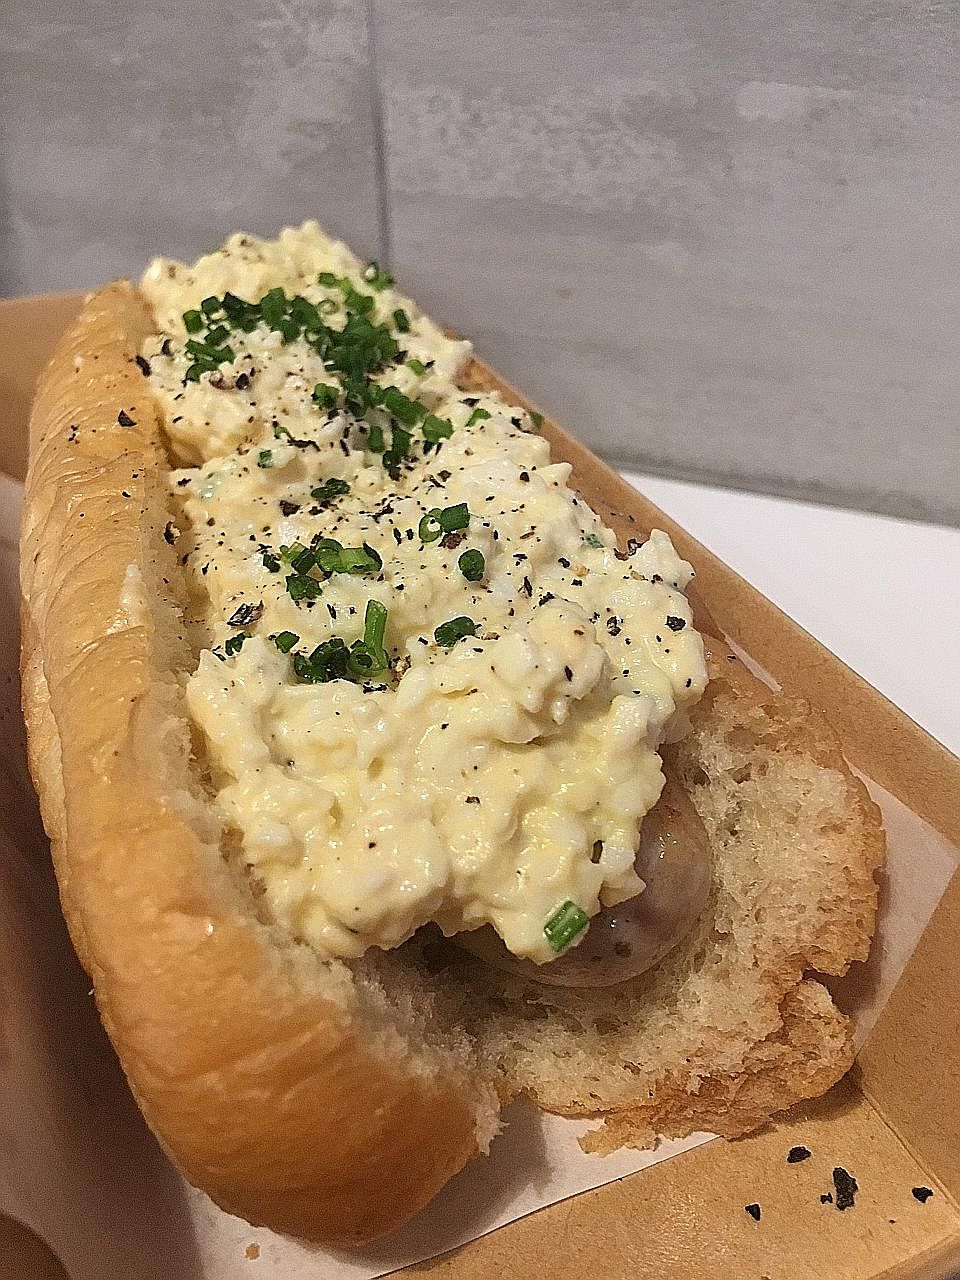 The truffle egg mayo pork hotdog ($6.90) comes with a generous amount of creamy egg mayonnaise that covers the sausage entirely.